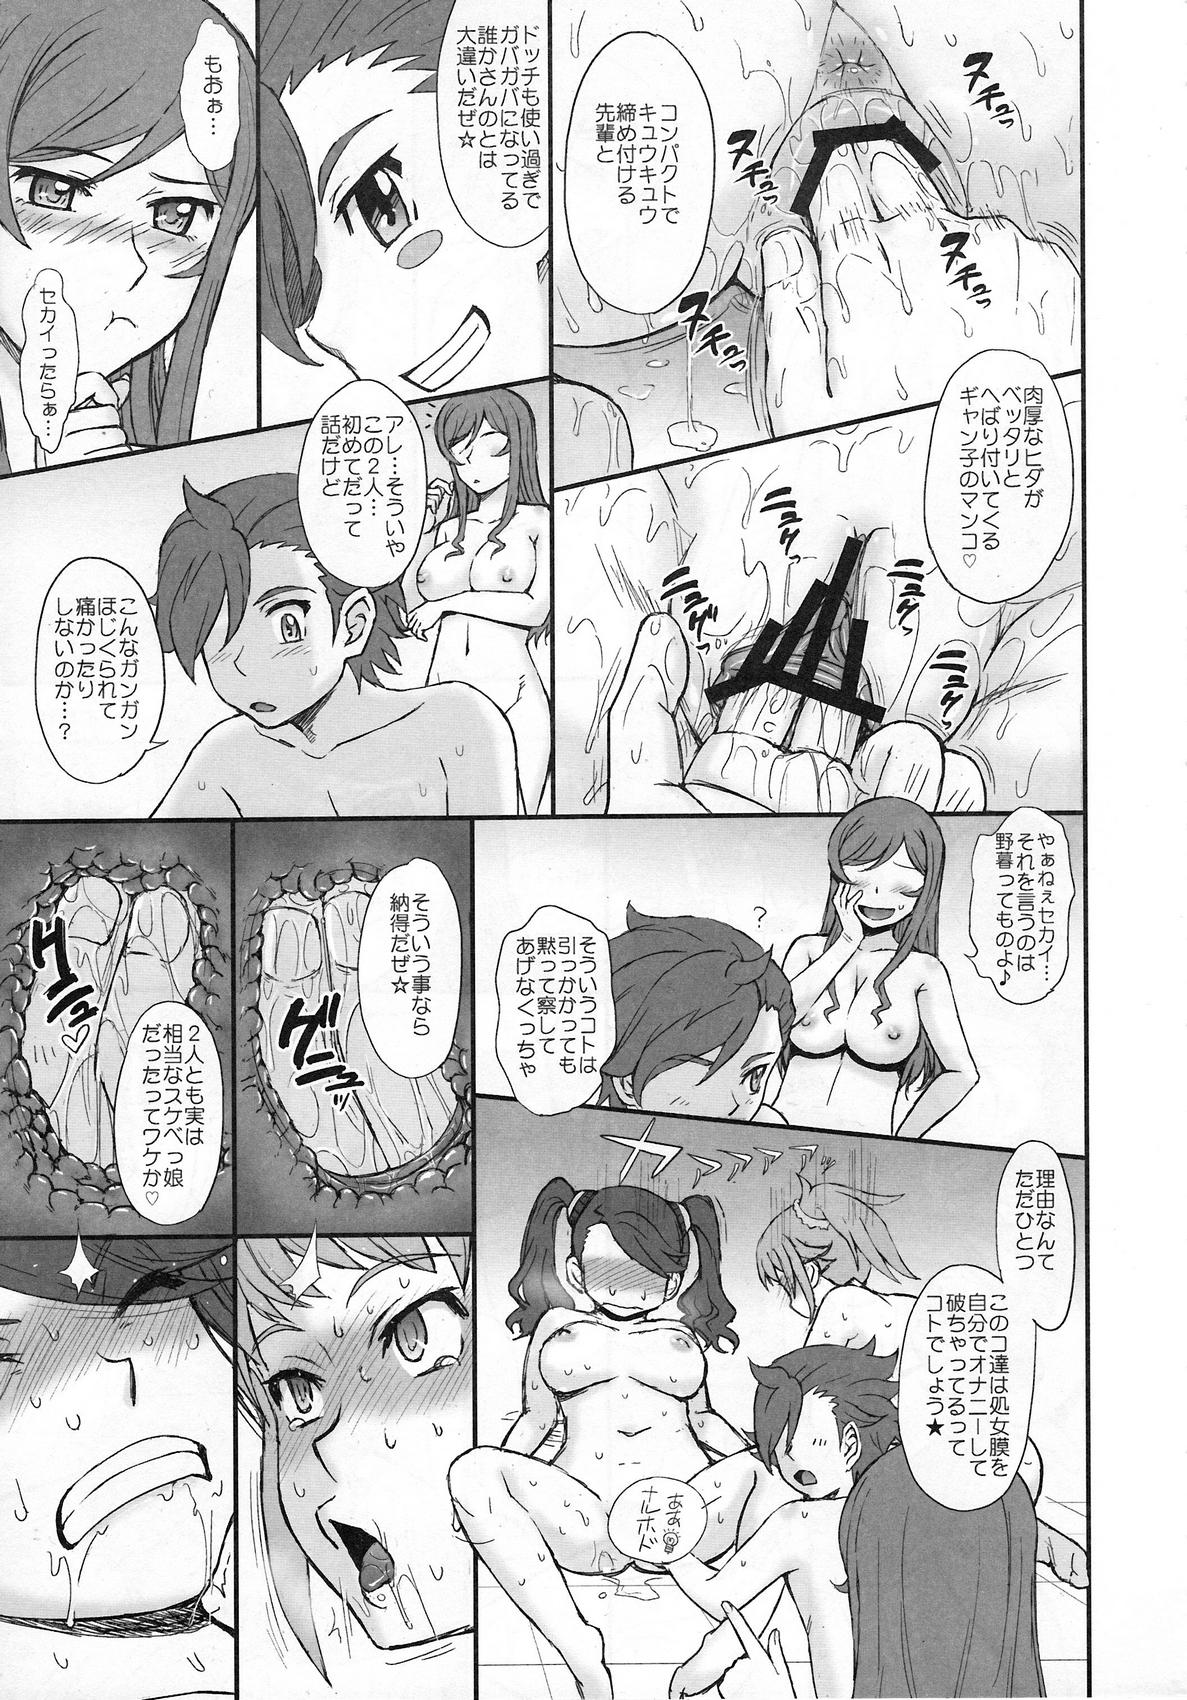 Lesbo Try Try Try!! - Gundam build fighters try Girls Fucking - Page 12